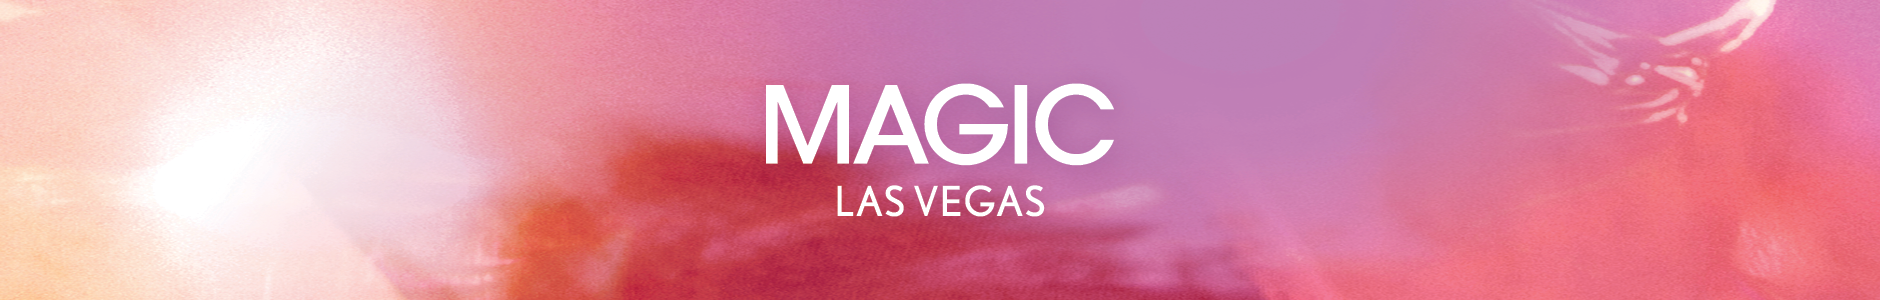 MAGIC is a high-energy fashion experience and home to the largest selection of trend, young contemporary, modern sportswear, apparel, footwear, and accessories brands.